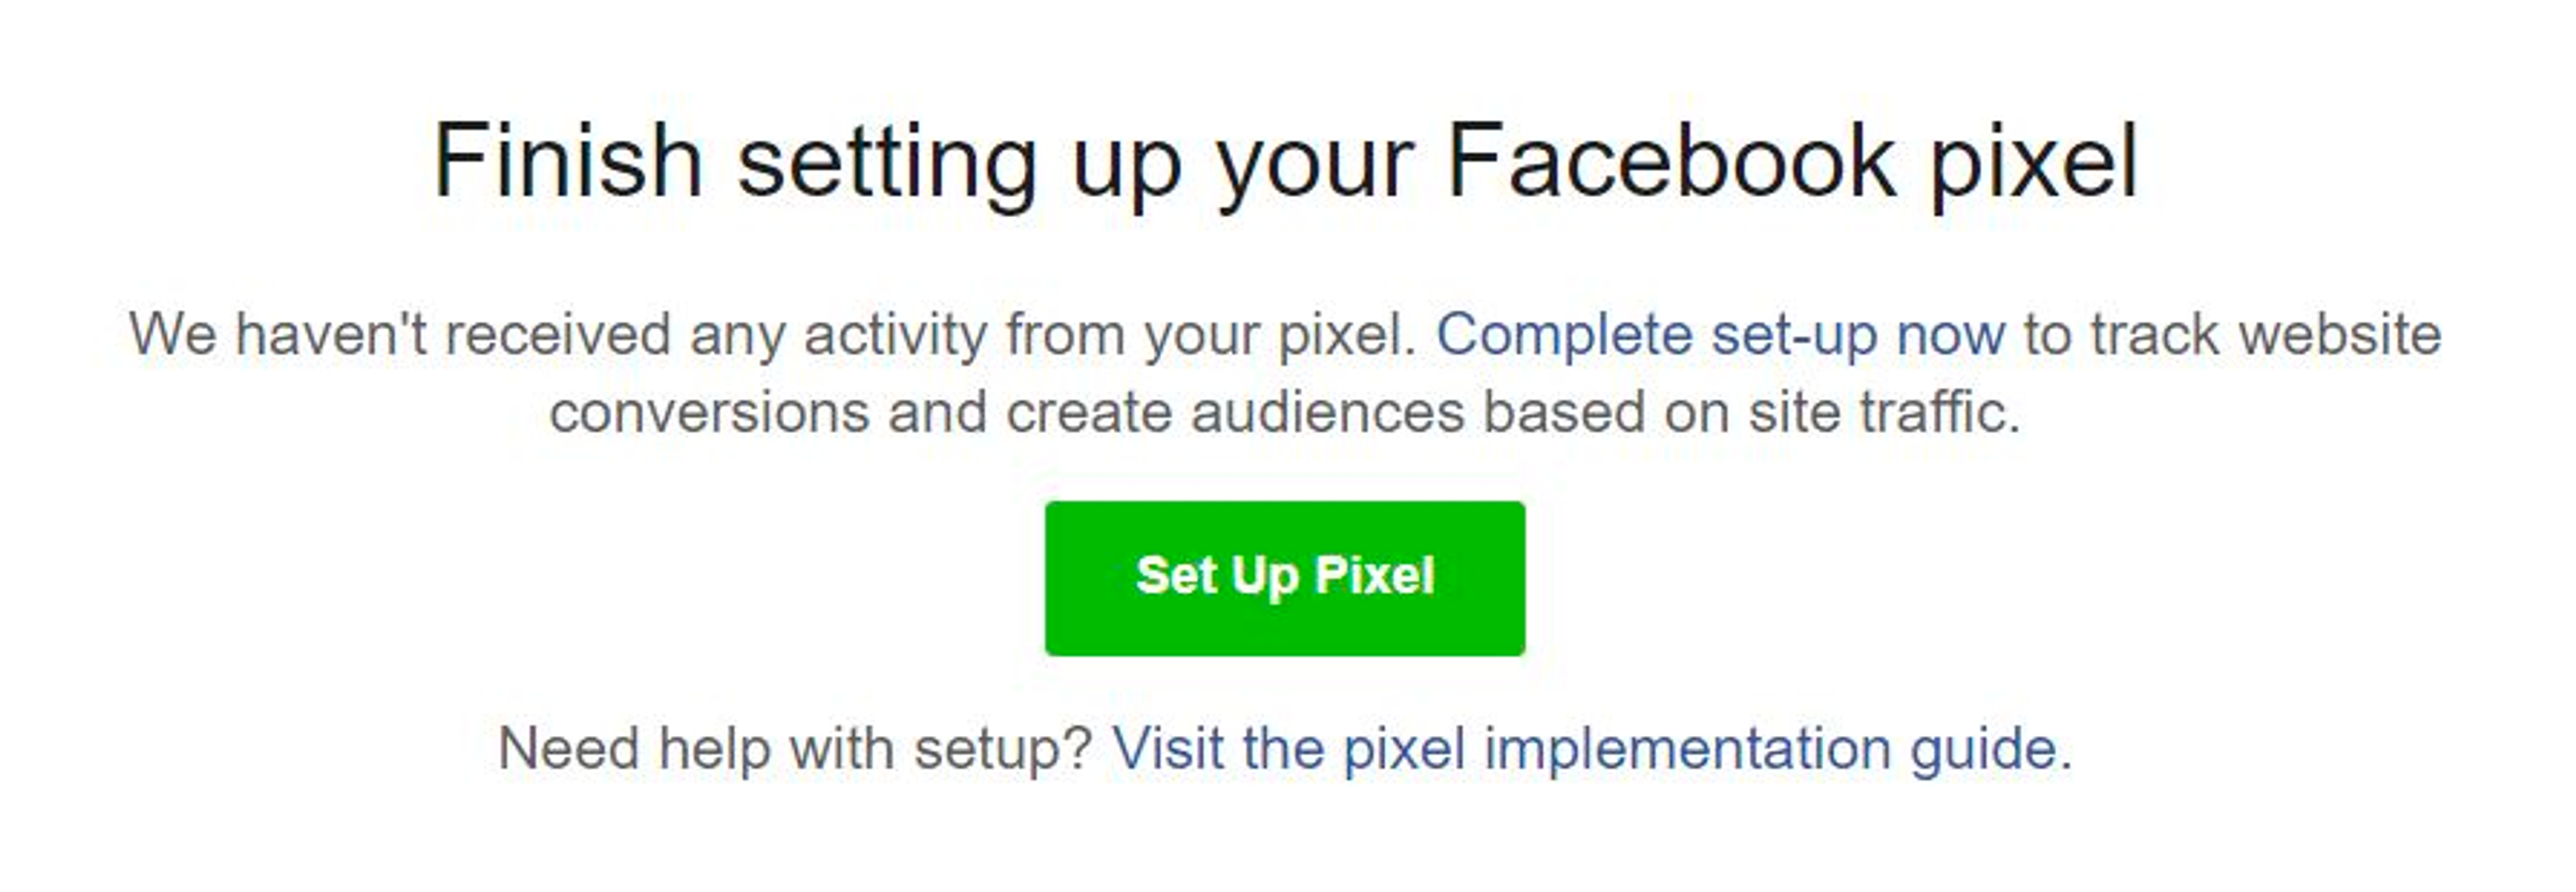 Screenshot of the Finish setting up your Facebook Pixel screen